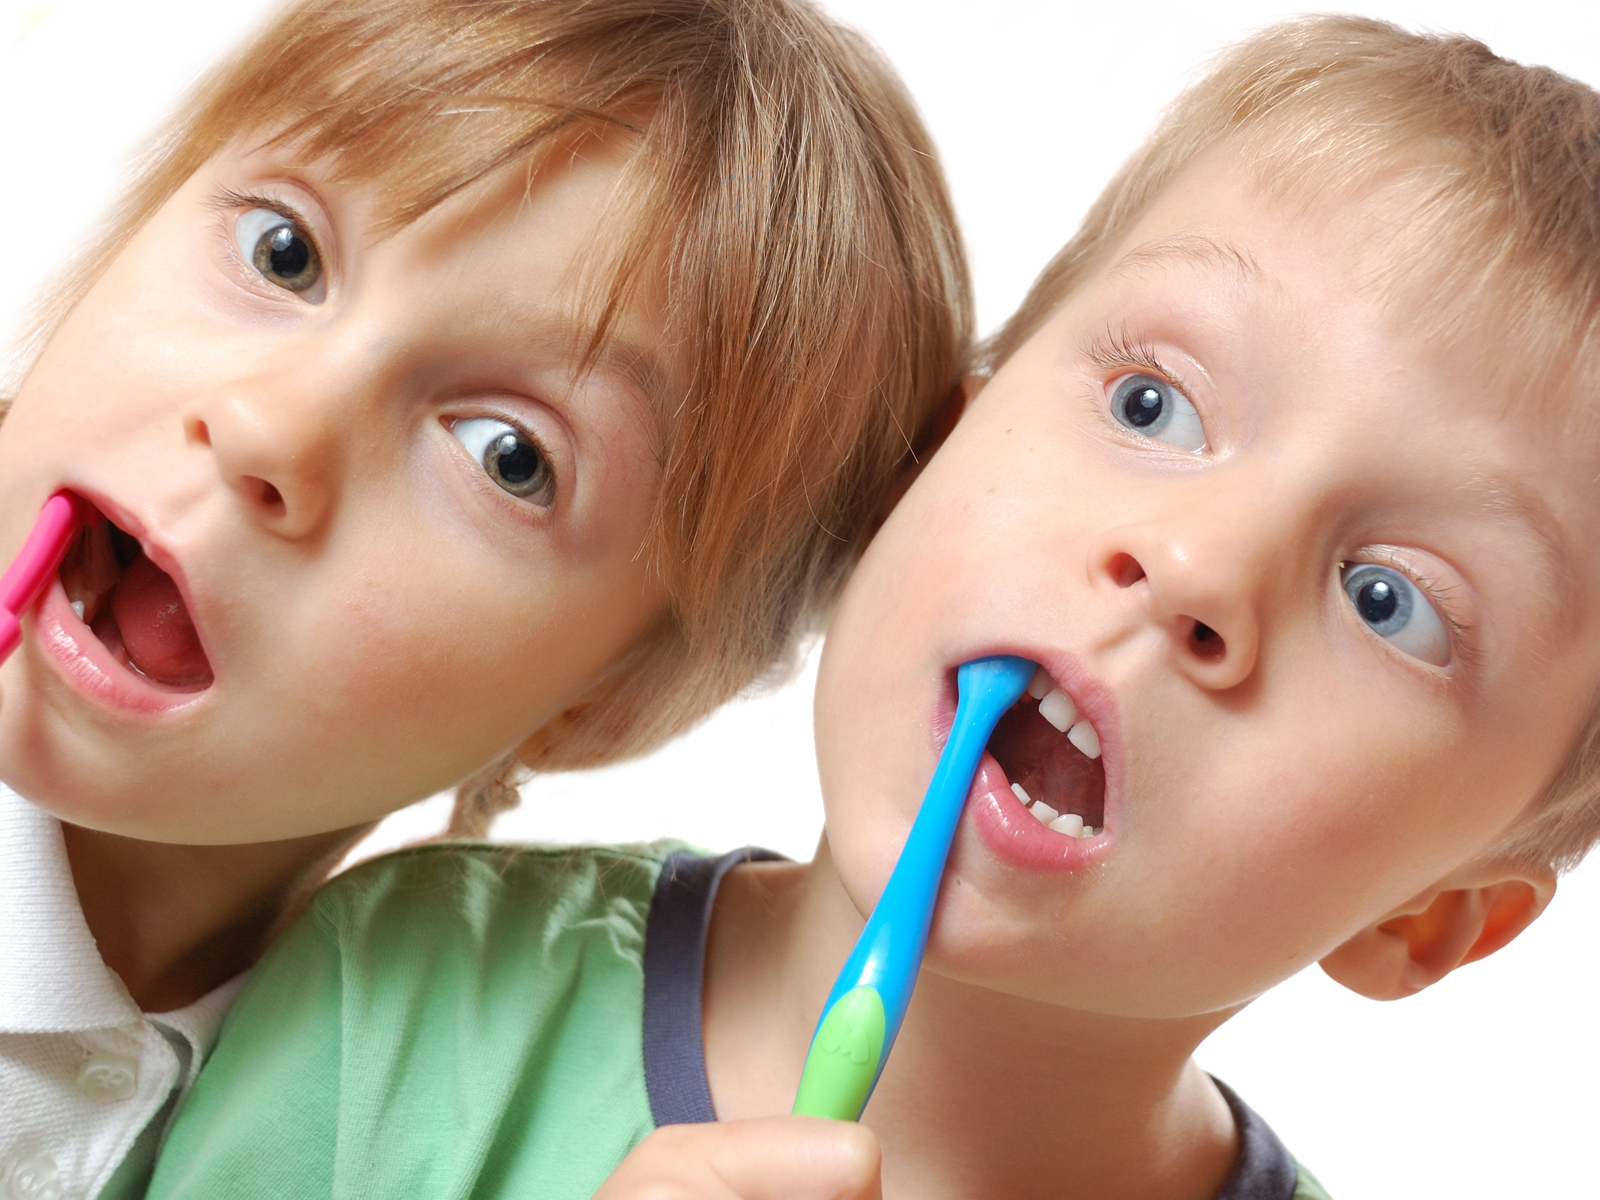 When should you introduce toothpaste to a child?